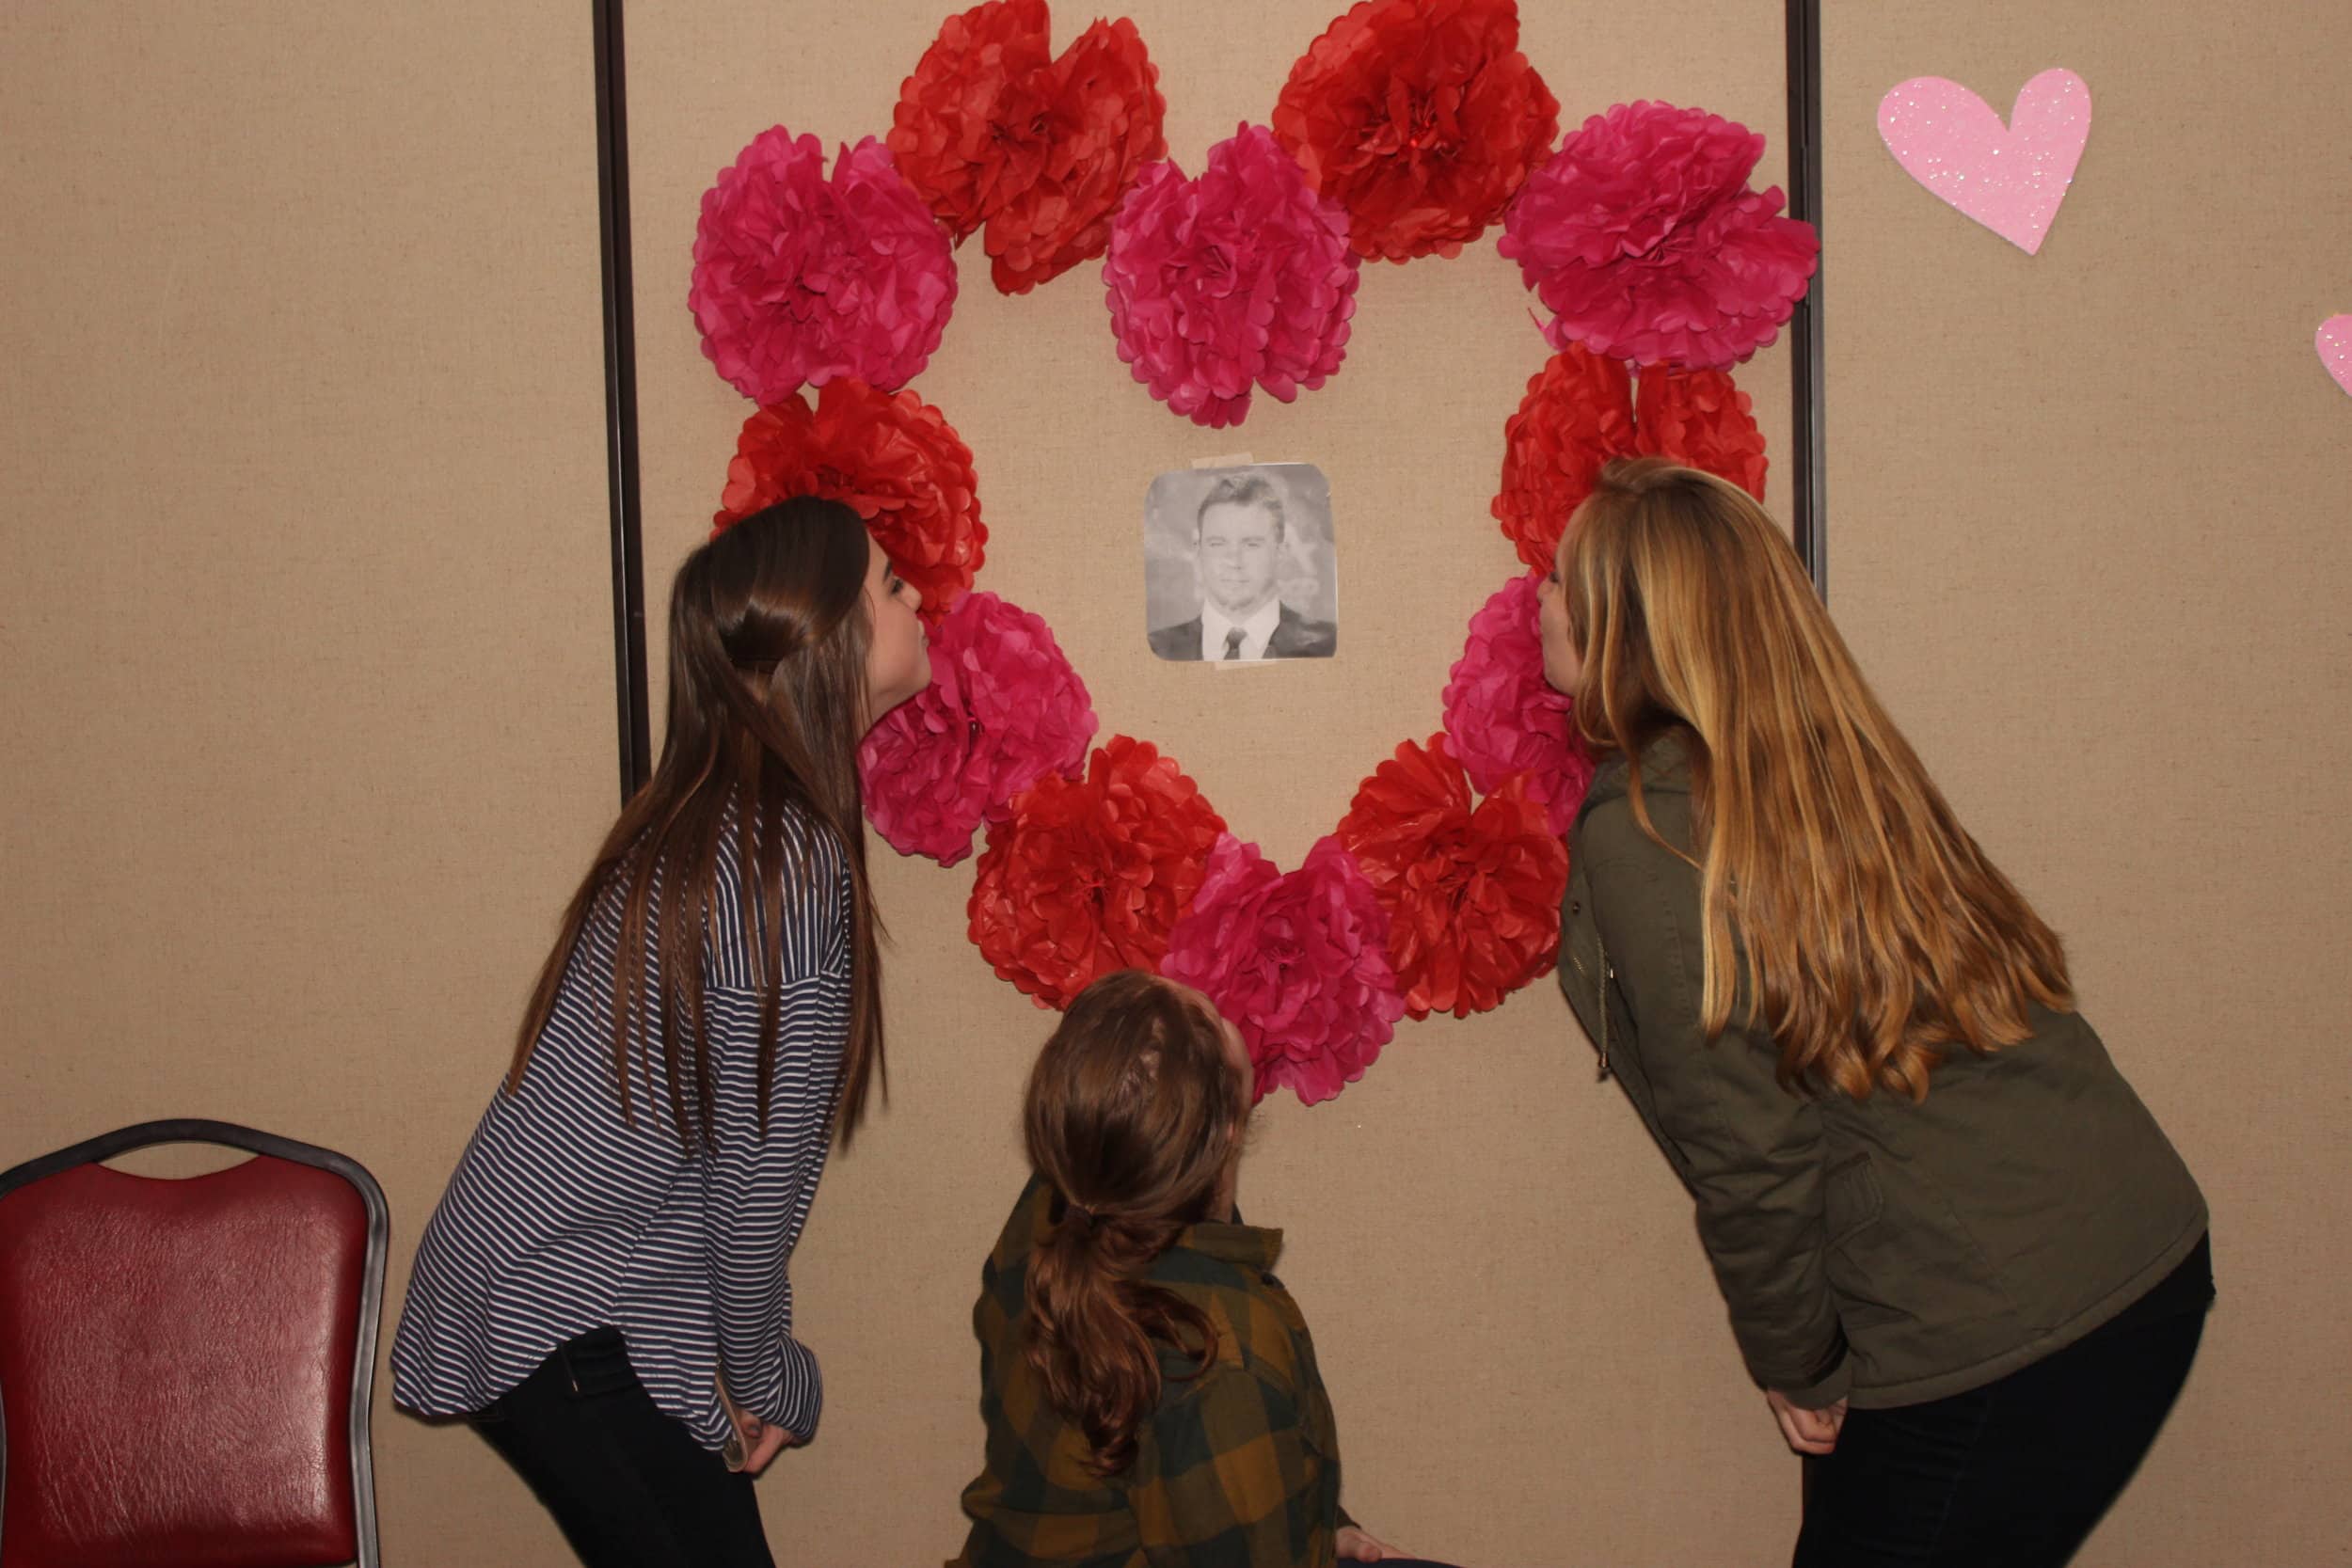 Junior Mary Margaret Shelley and sophomores Allysa Yeater and Sarah Byrd enjoyi the scenery at the Galentines event.